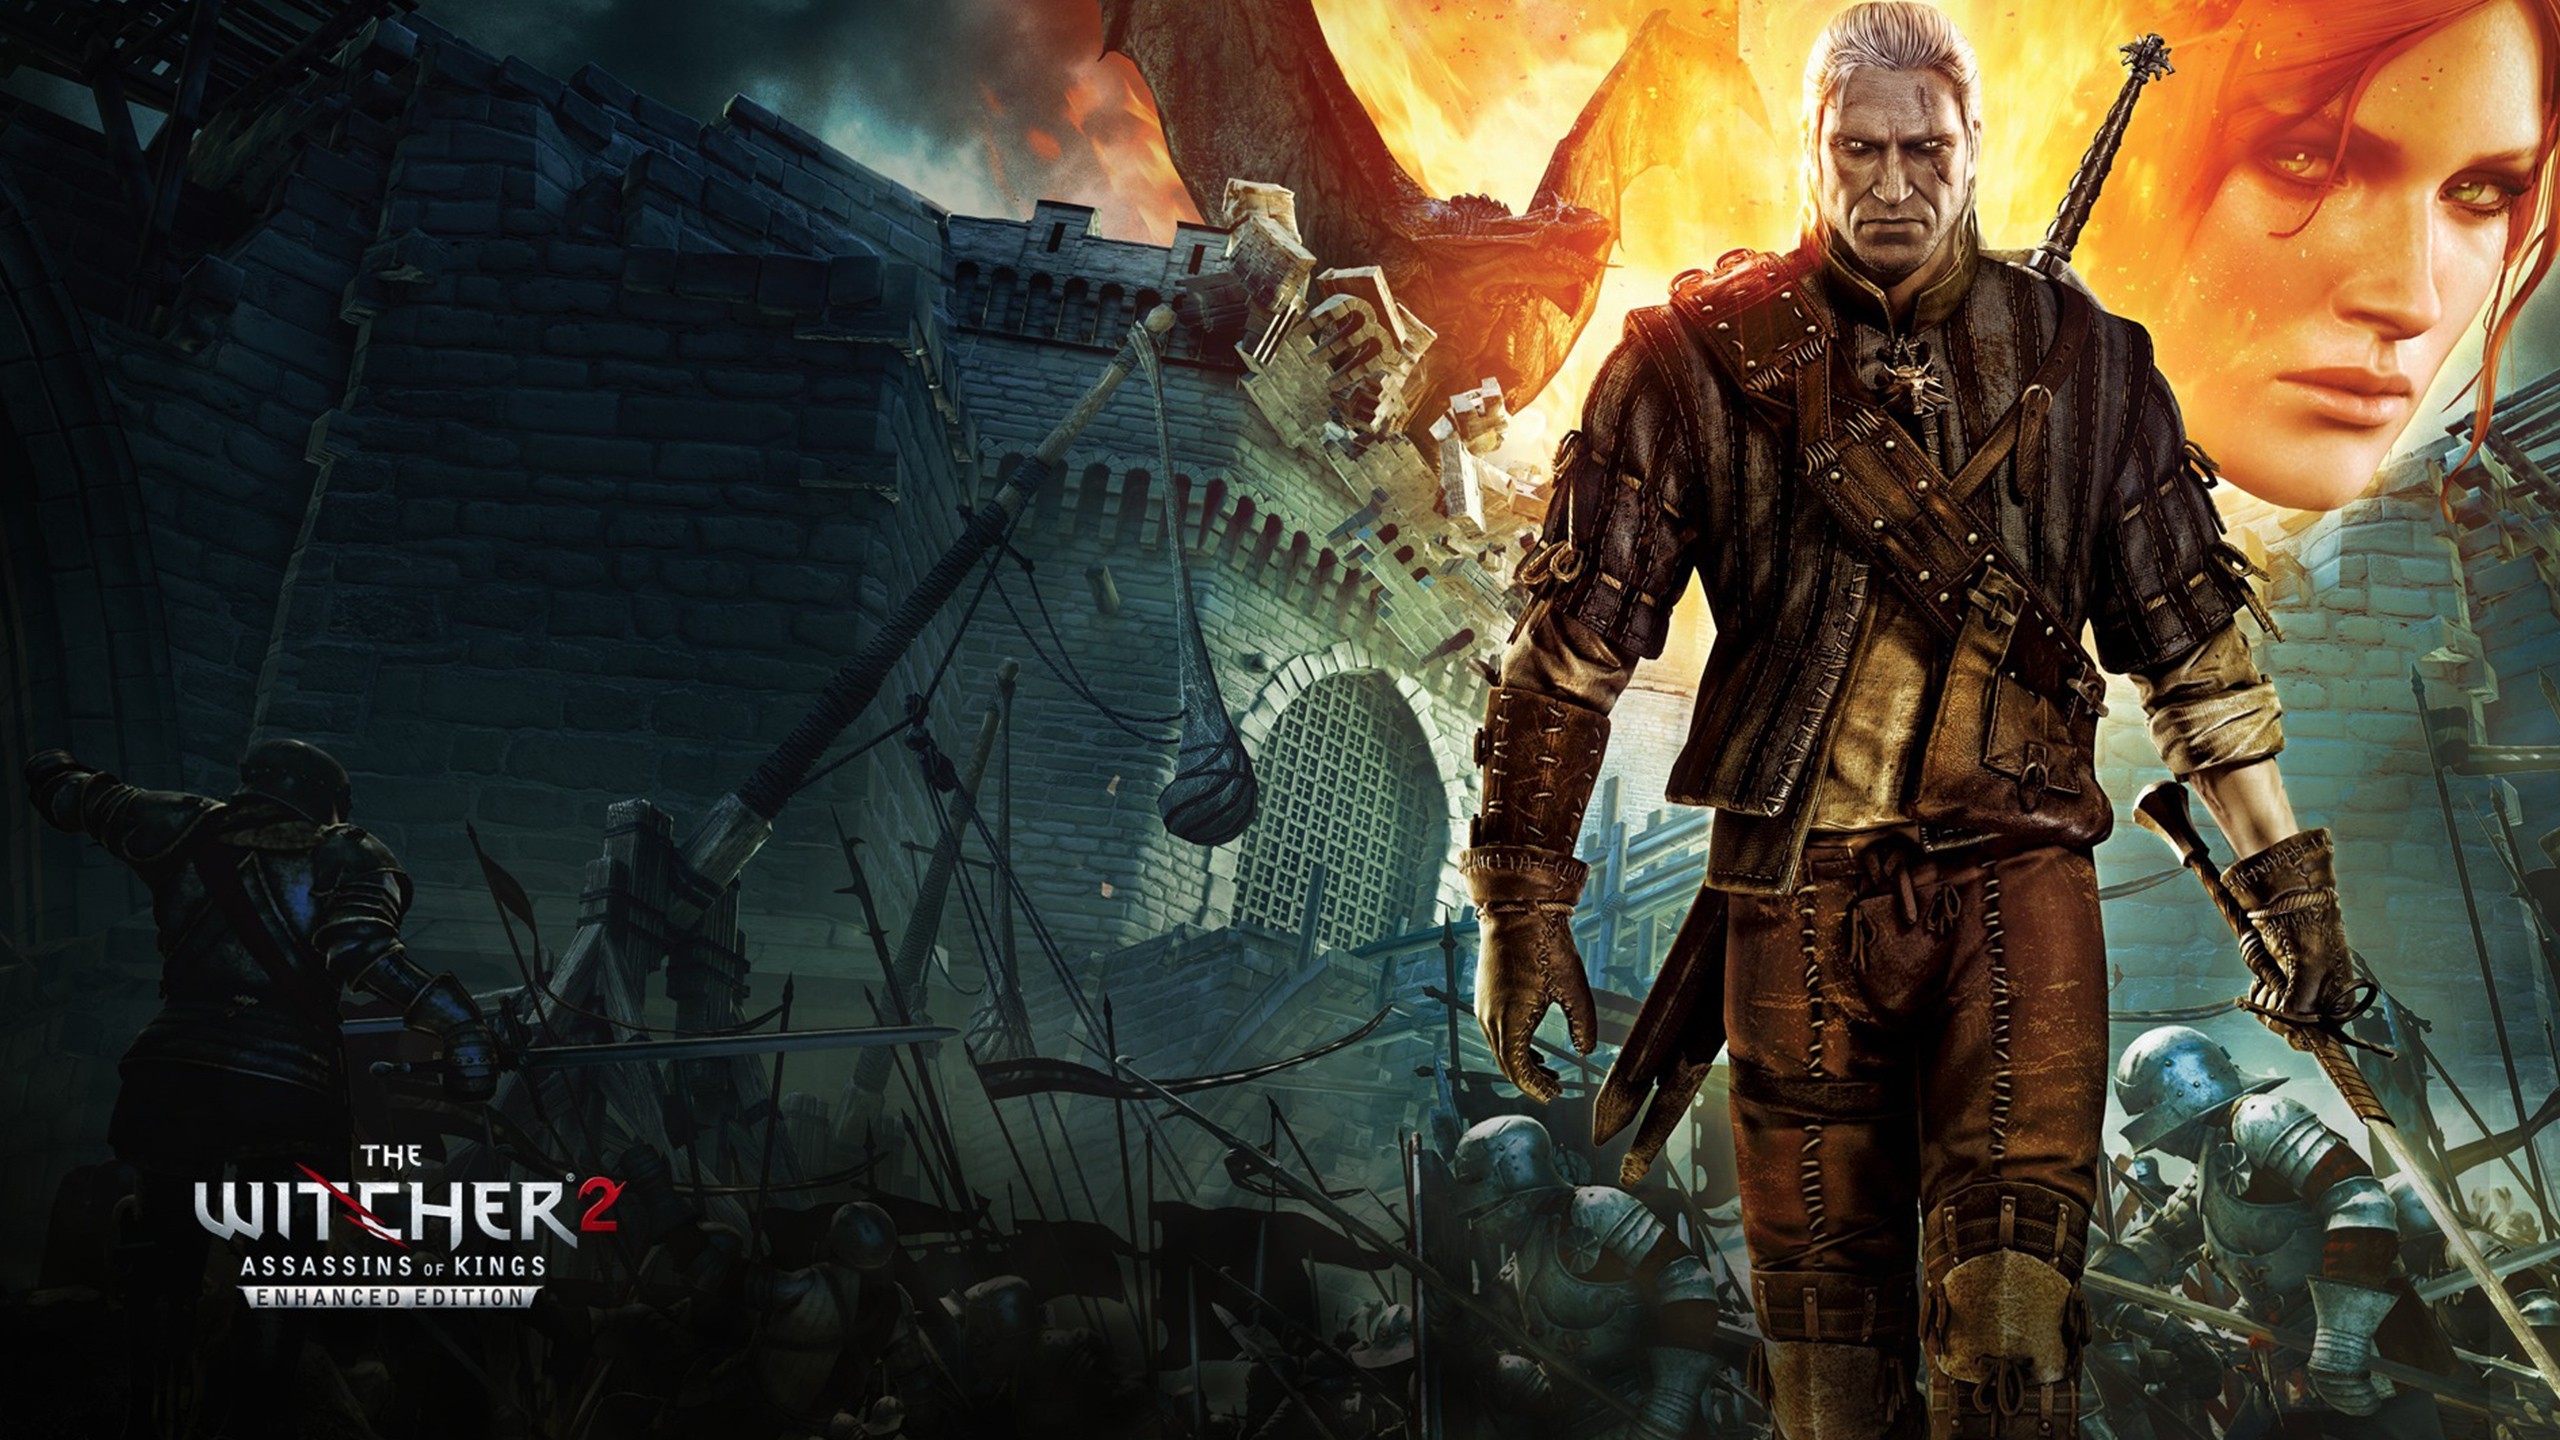 Video Game The Witcher 2 Assassins Of Kings 2560x1440